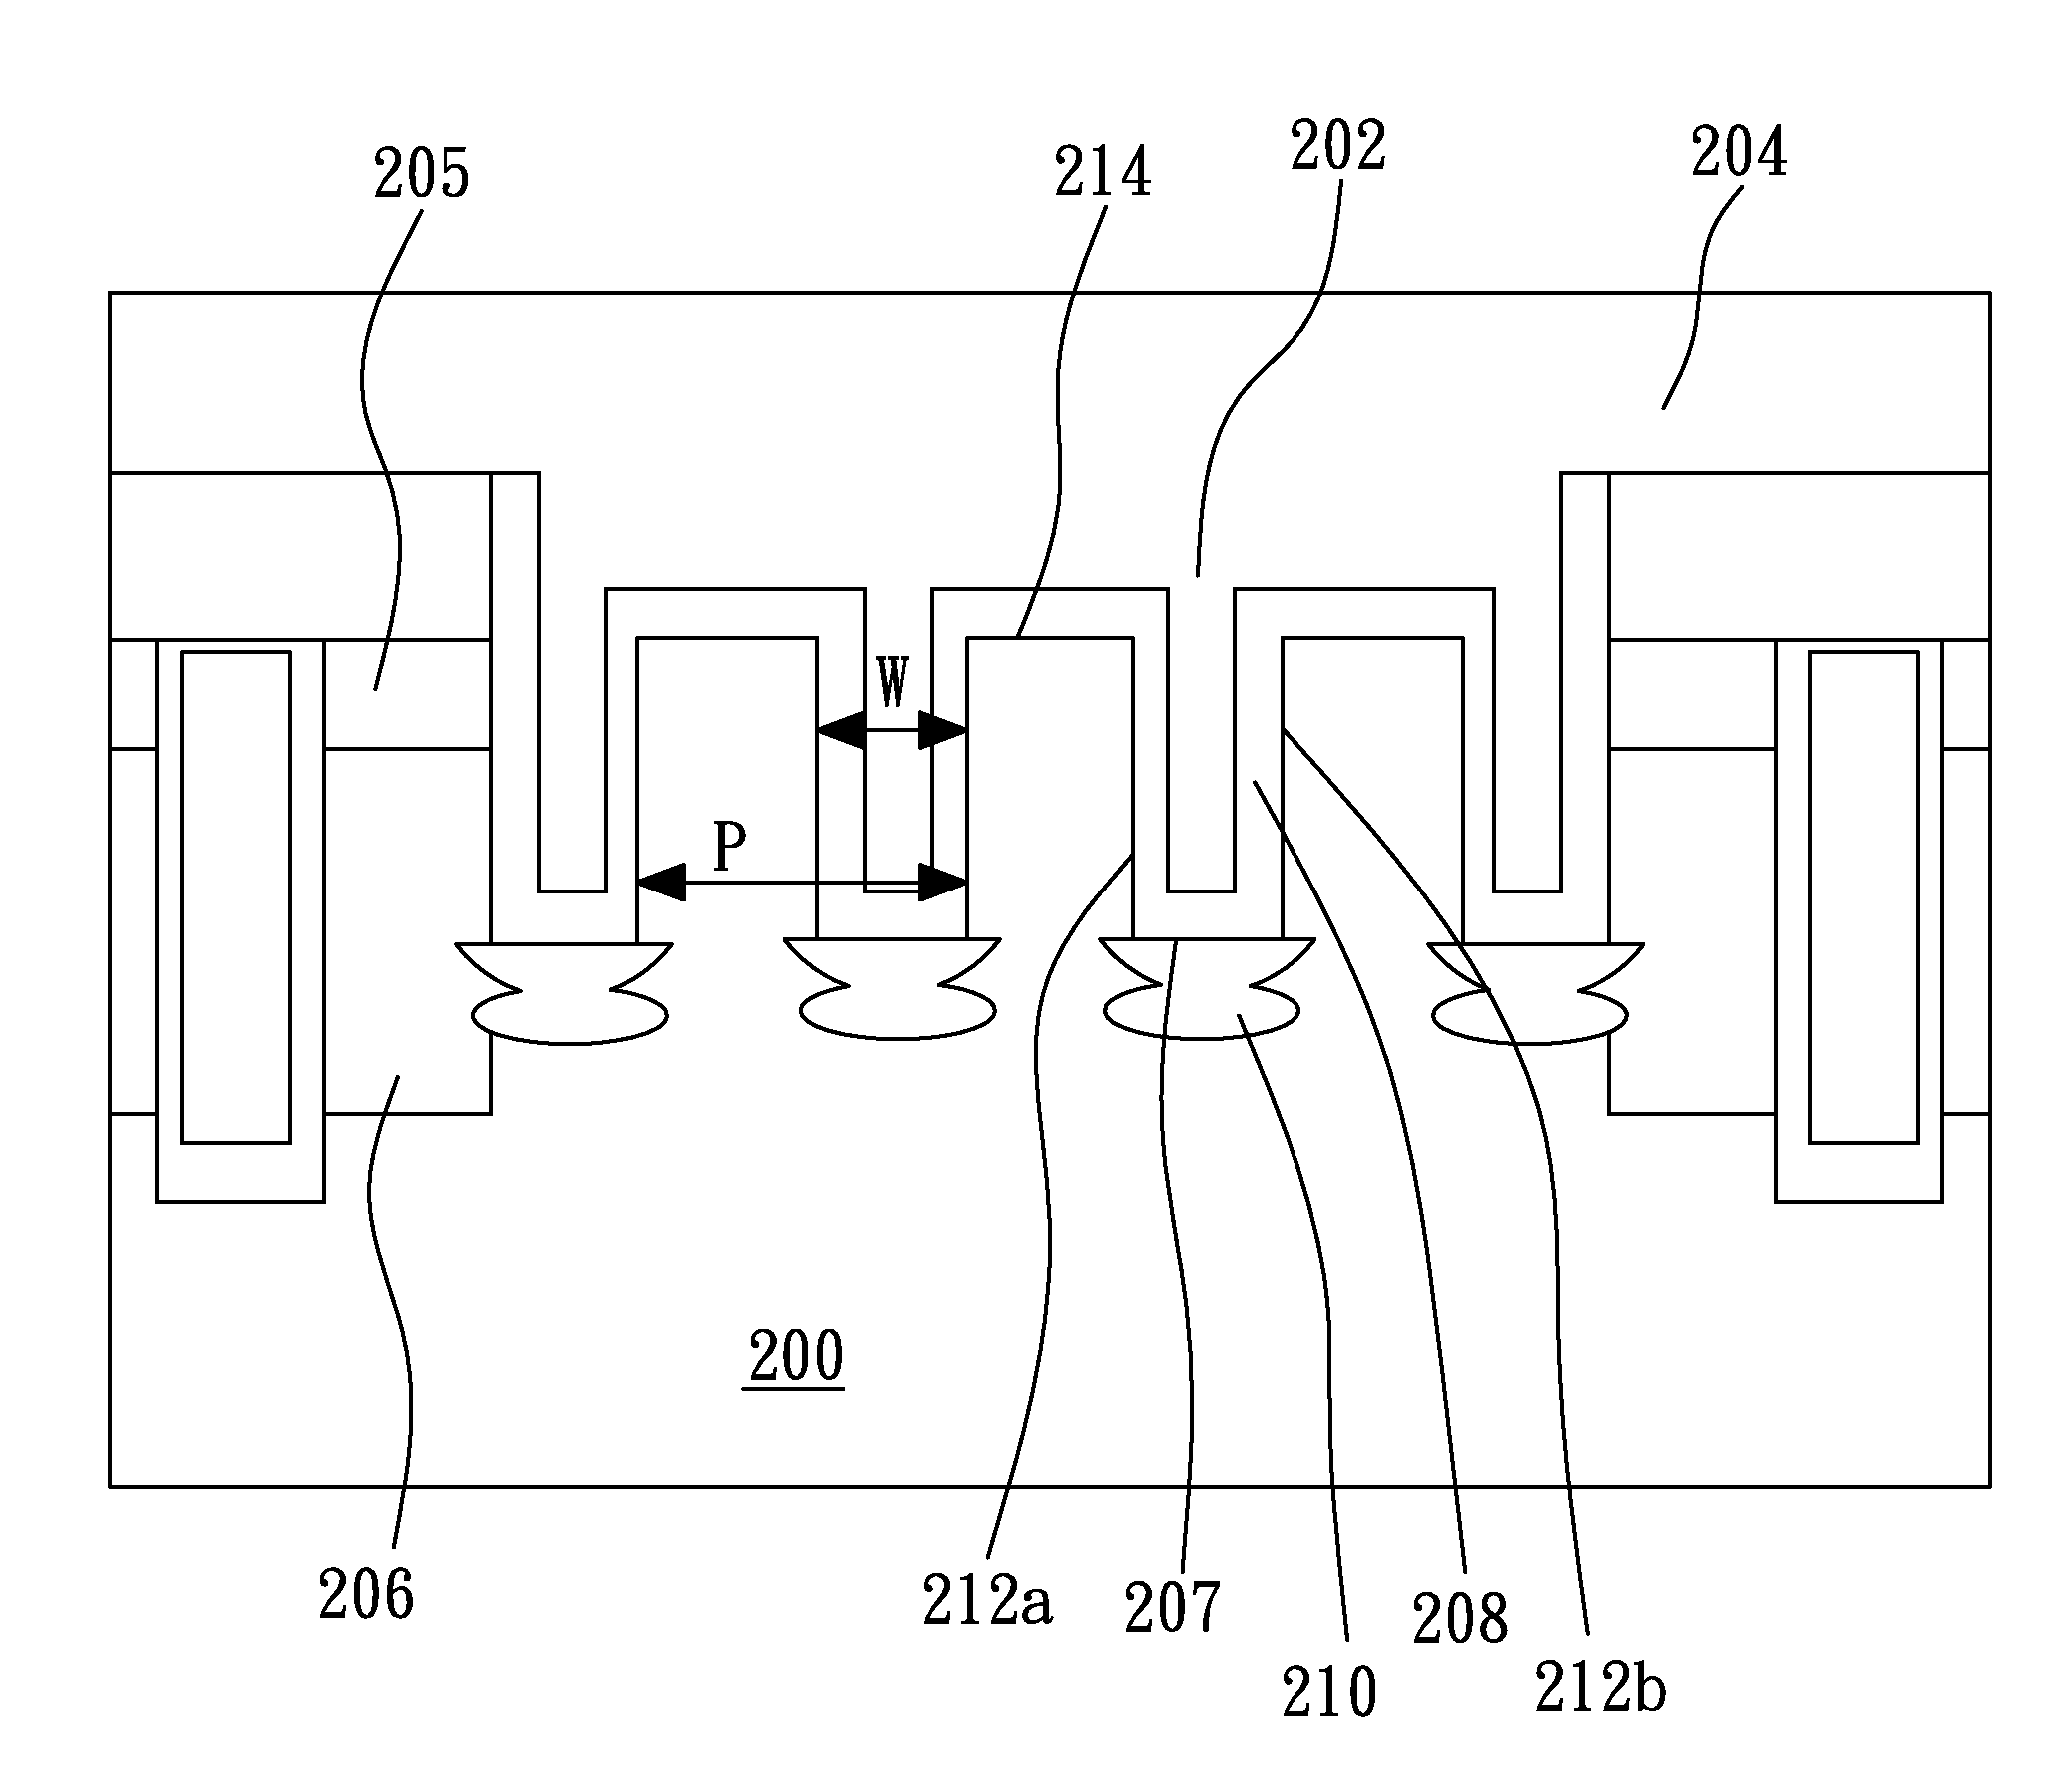 Trench junction barrier schottky structure with enhanced contact area integrated with a mosfet